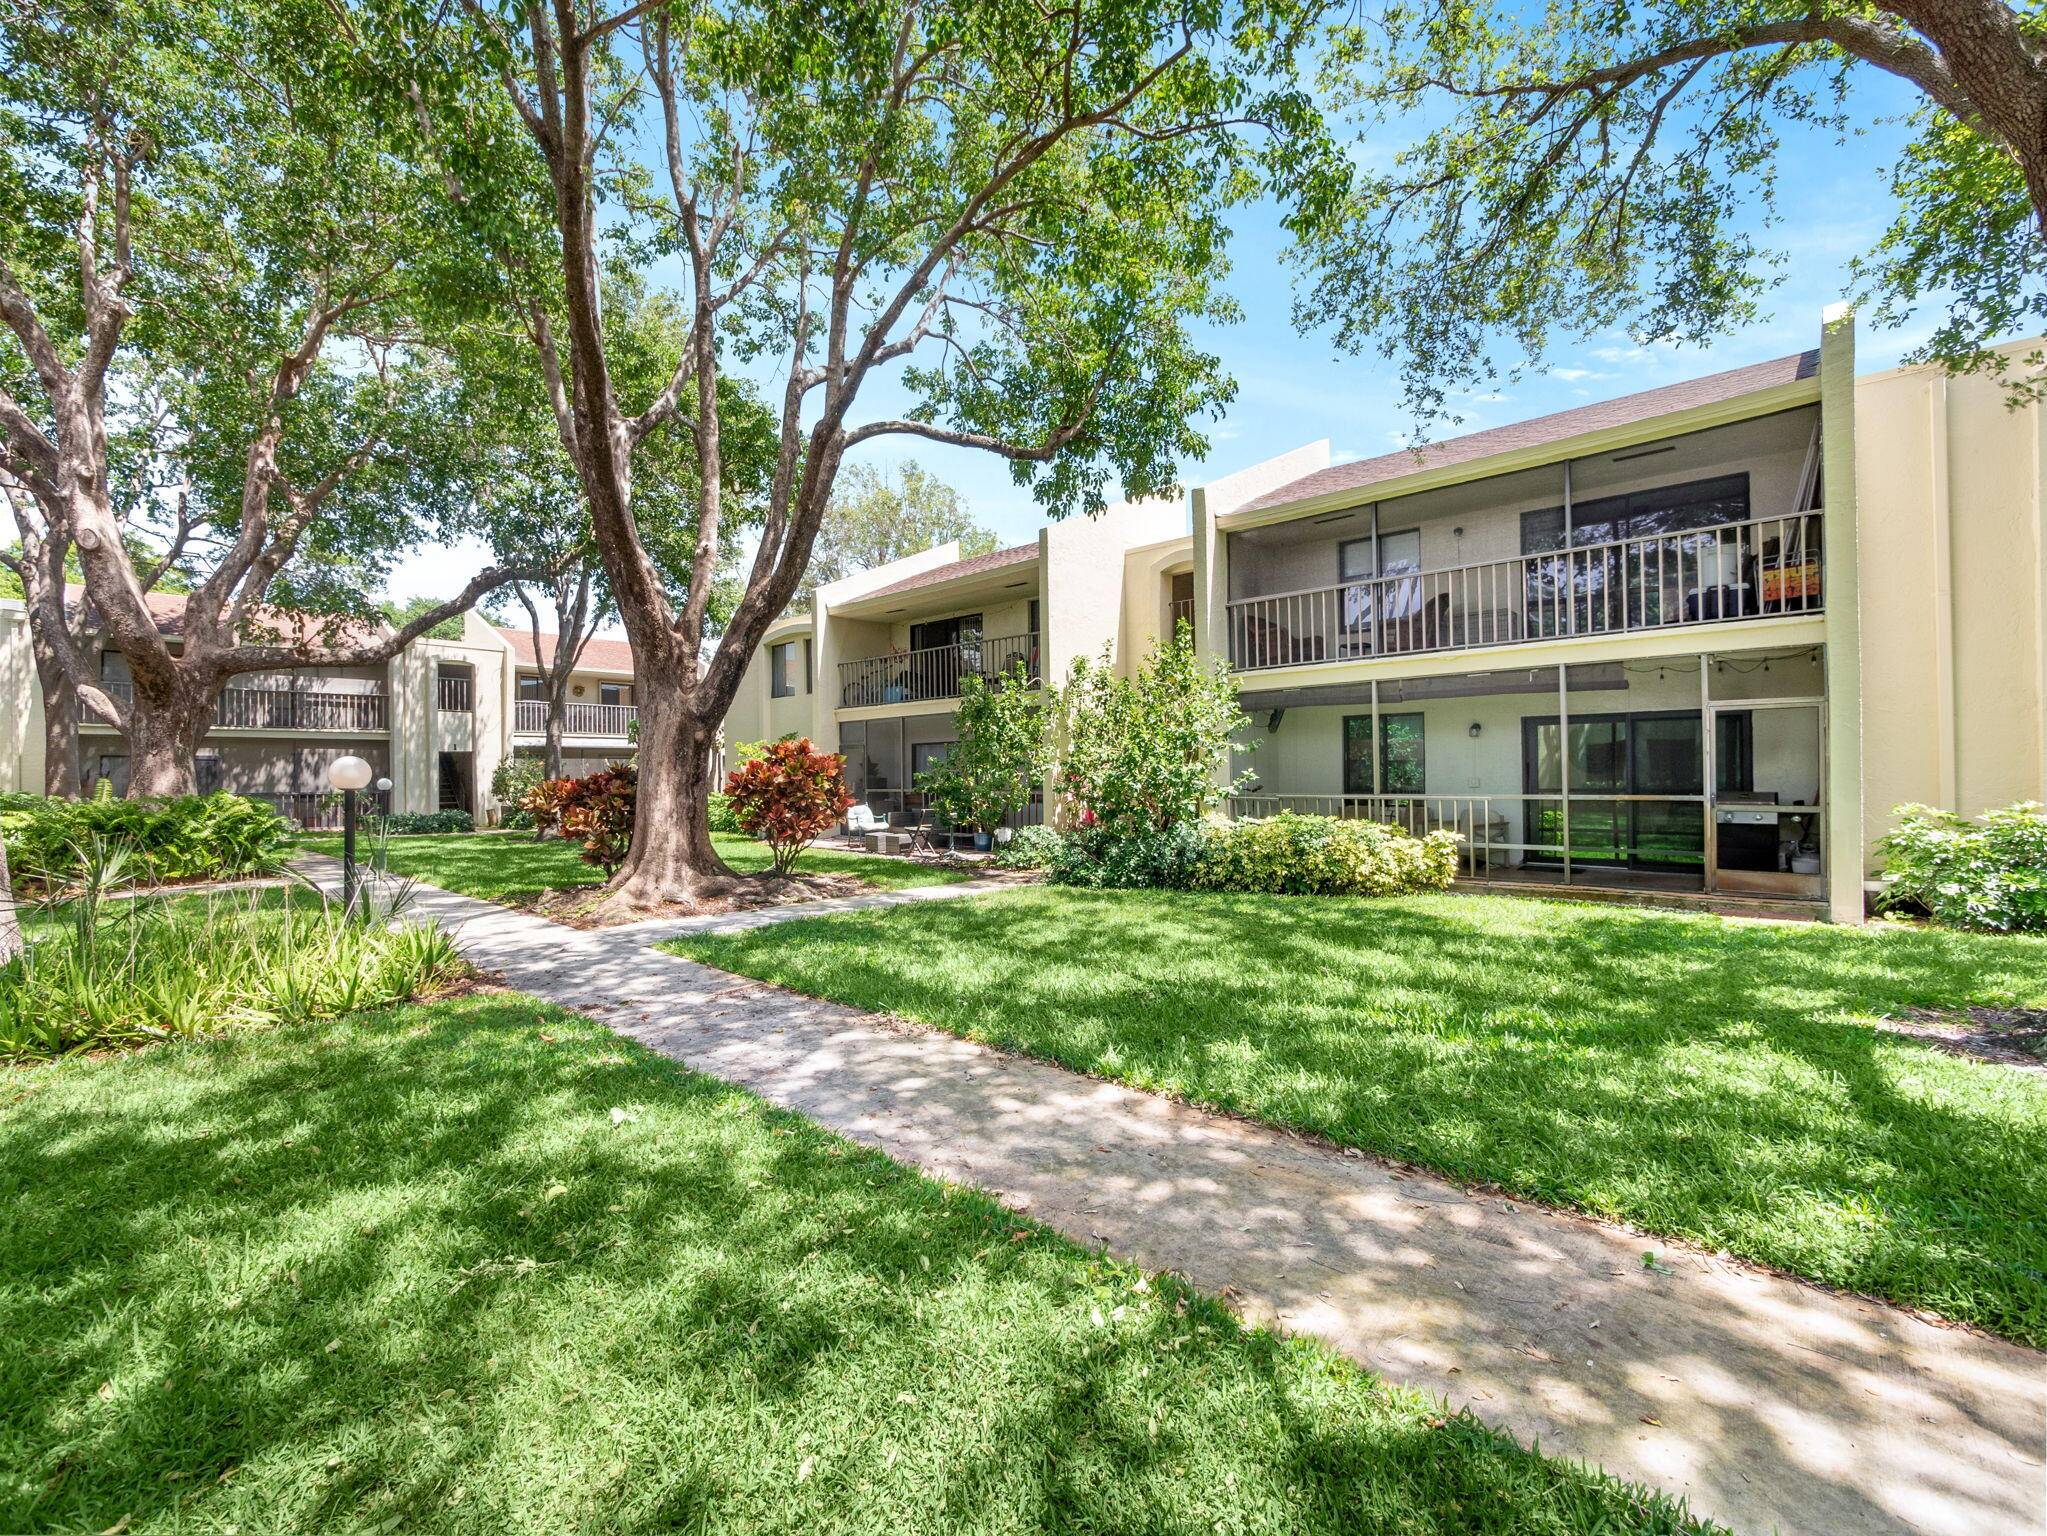 Charming ground floor unit boasting freshly painted interiors and exteriors, enhanced with granite countertops and backsplash, stainless steel appliances, and tile flooring throughout the living areas complemented by vinyl flooring ...